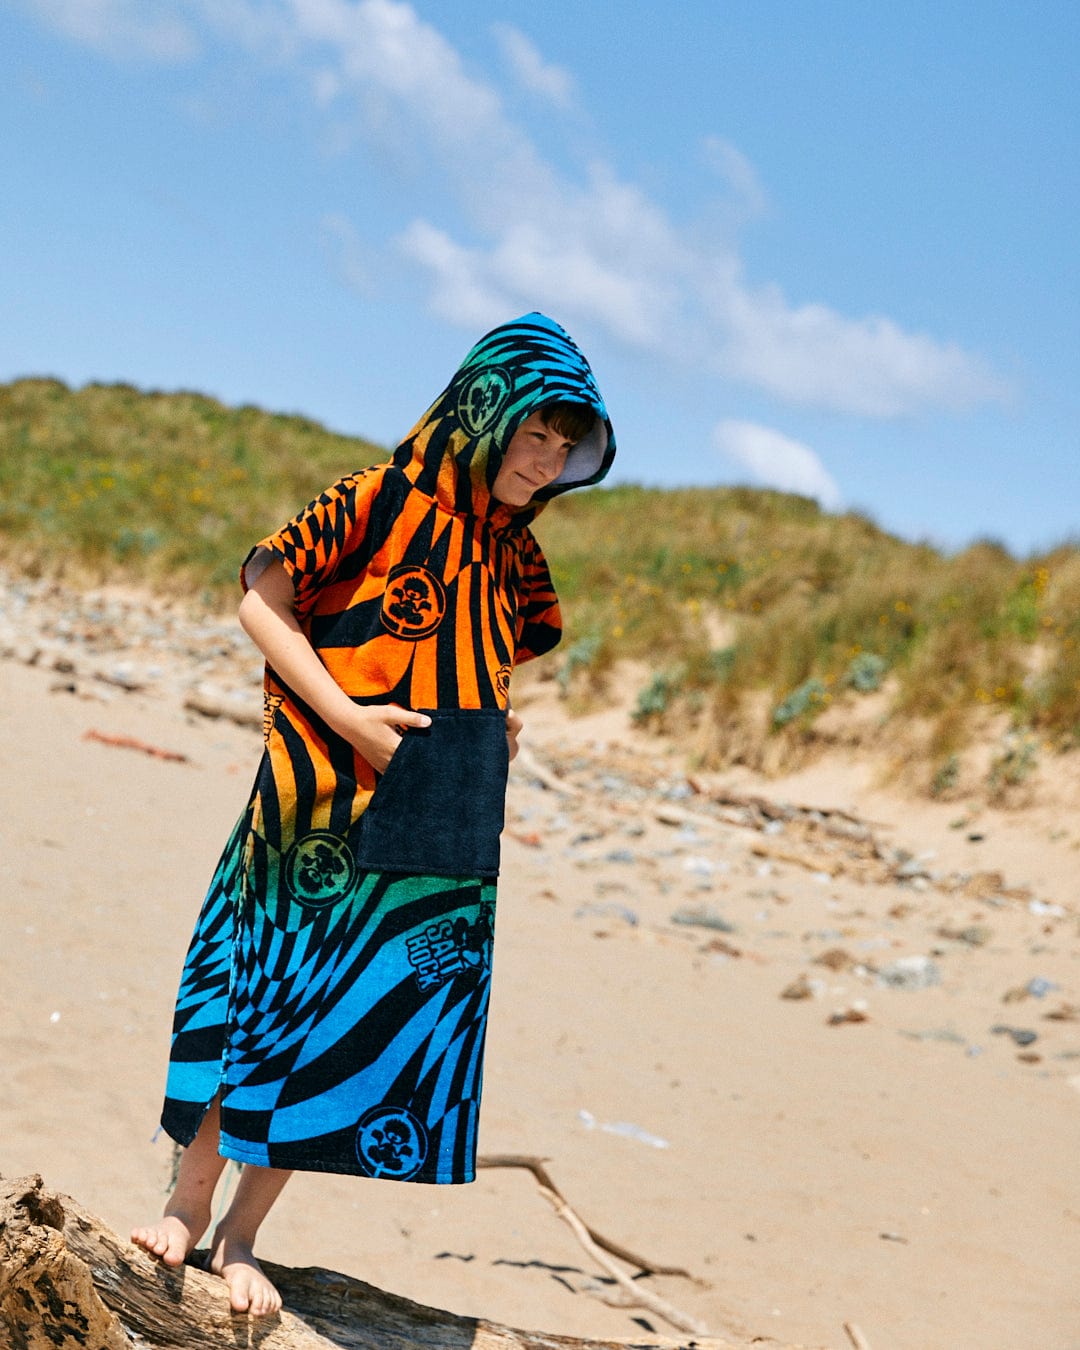 A child stands on a sandy beach wearing a Saltrock Warp Icon - Kids Changing Towel - Blue/Orange with patterns, against a backdrop of grassy dunes and a clear blue sky.